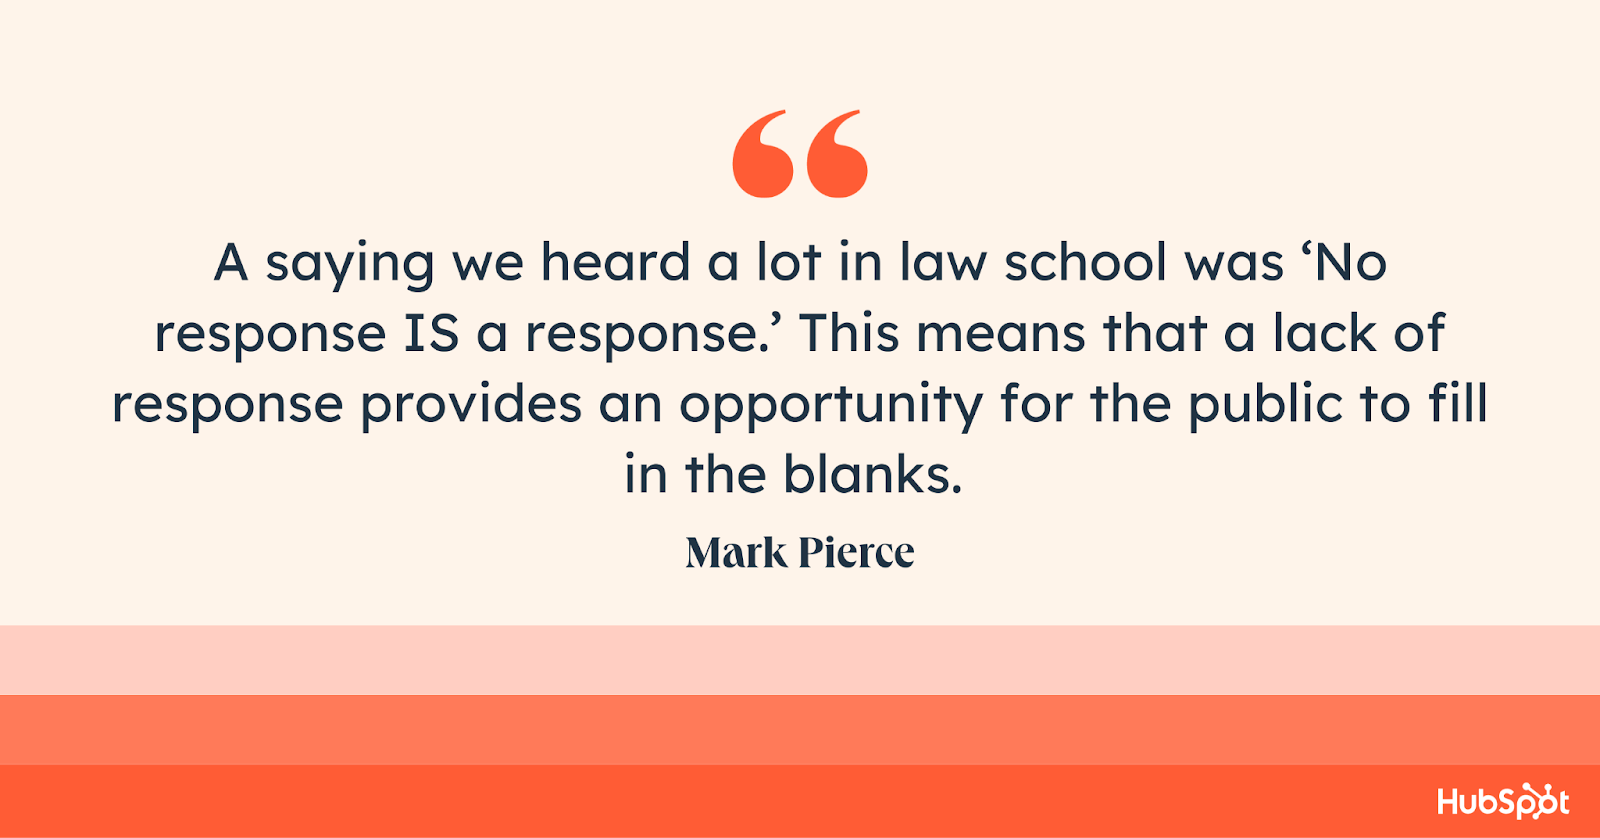 A saying we heard a lot in law school was ‘No response IS a response.’ This means that a lack of response provides an opportunity for the public to fill in the blanks. 